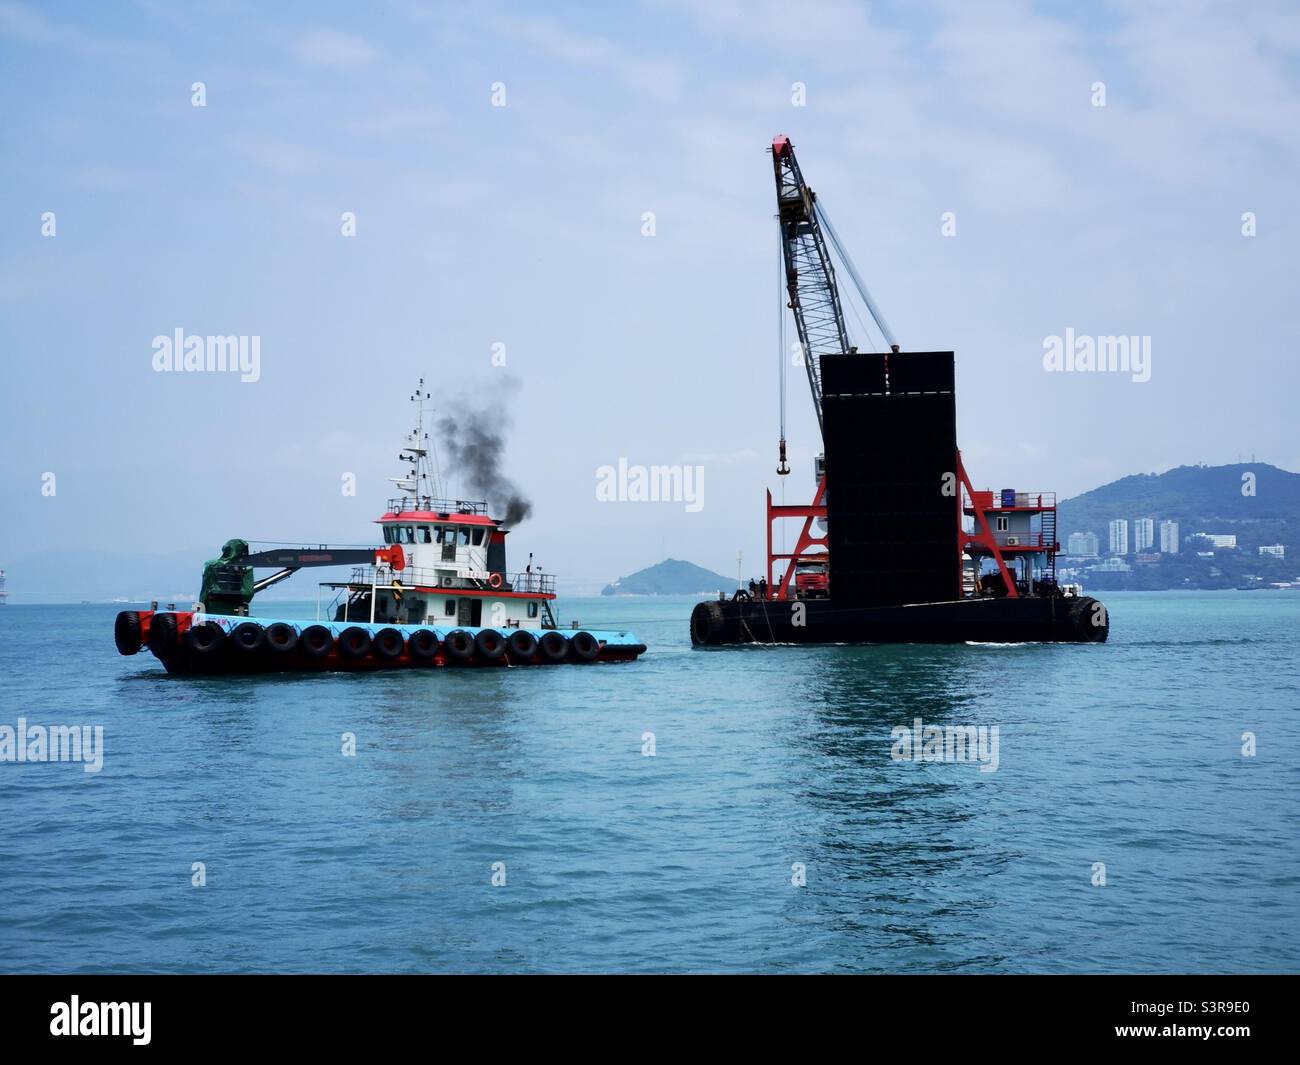 A barge pulling a crane and trucks for the construction of the new pier in Pak Kok, Lamma island,Hong Kong. Stock Photo